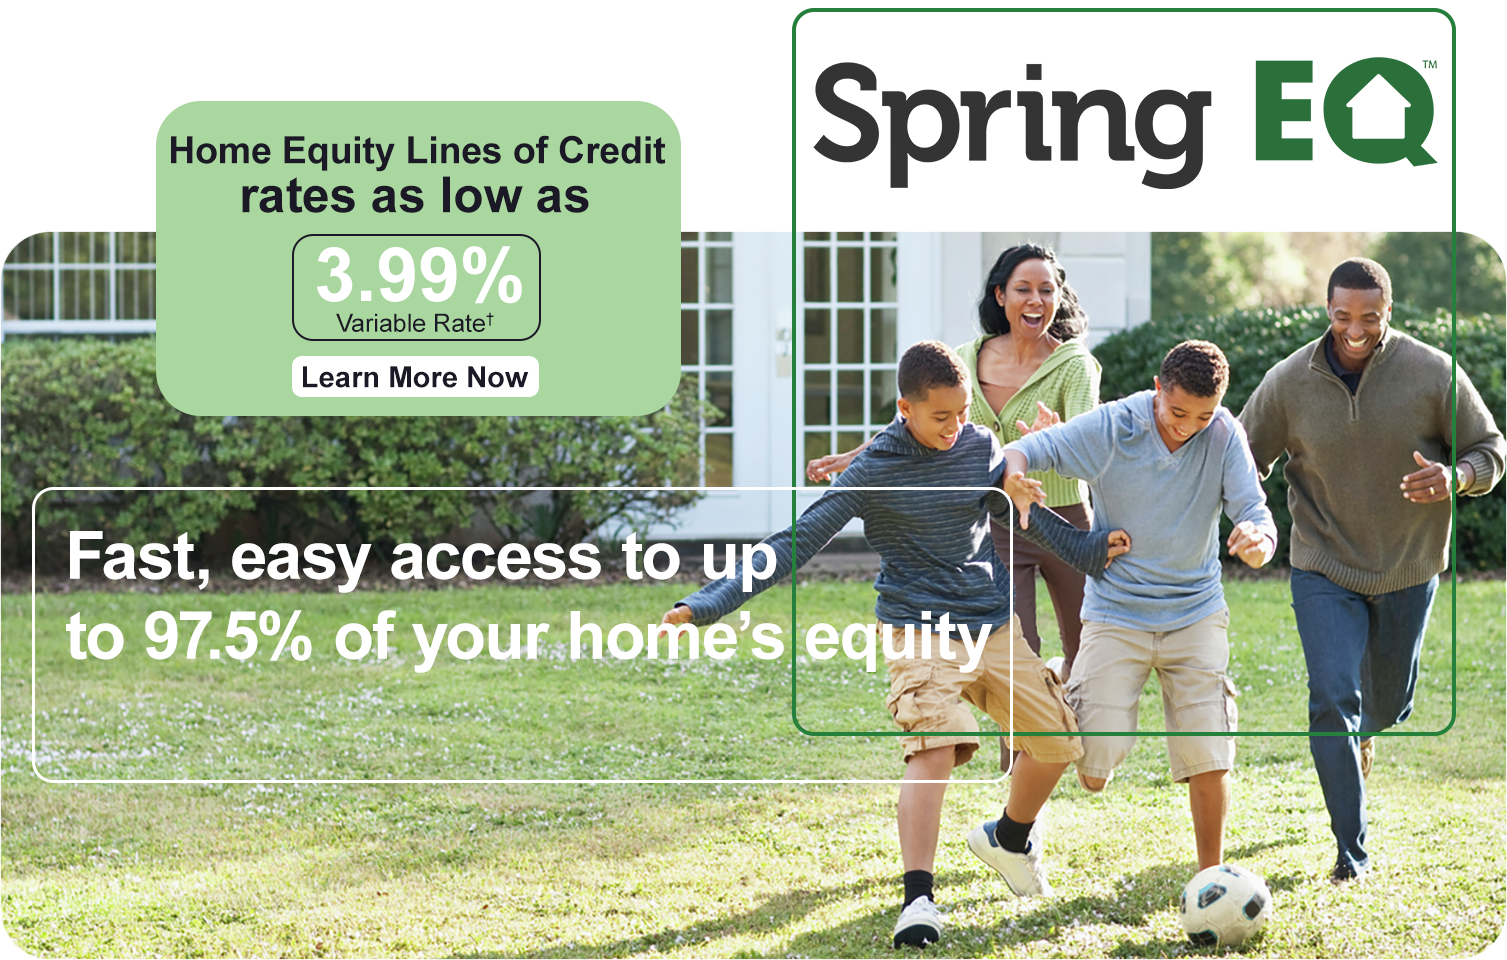 Spring EQ Access Up to 97.5% Of Your Home Equity